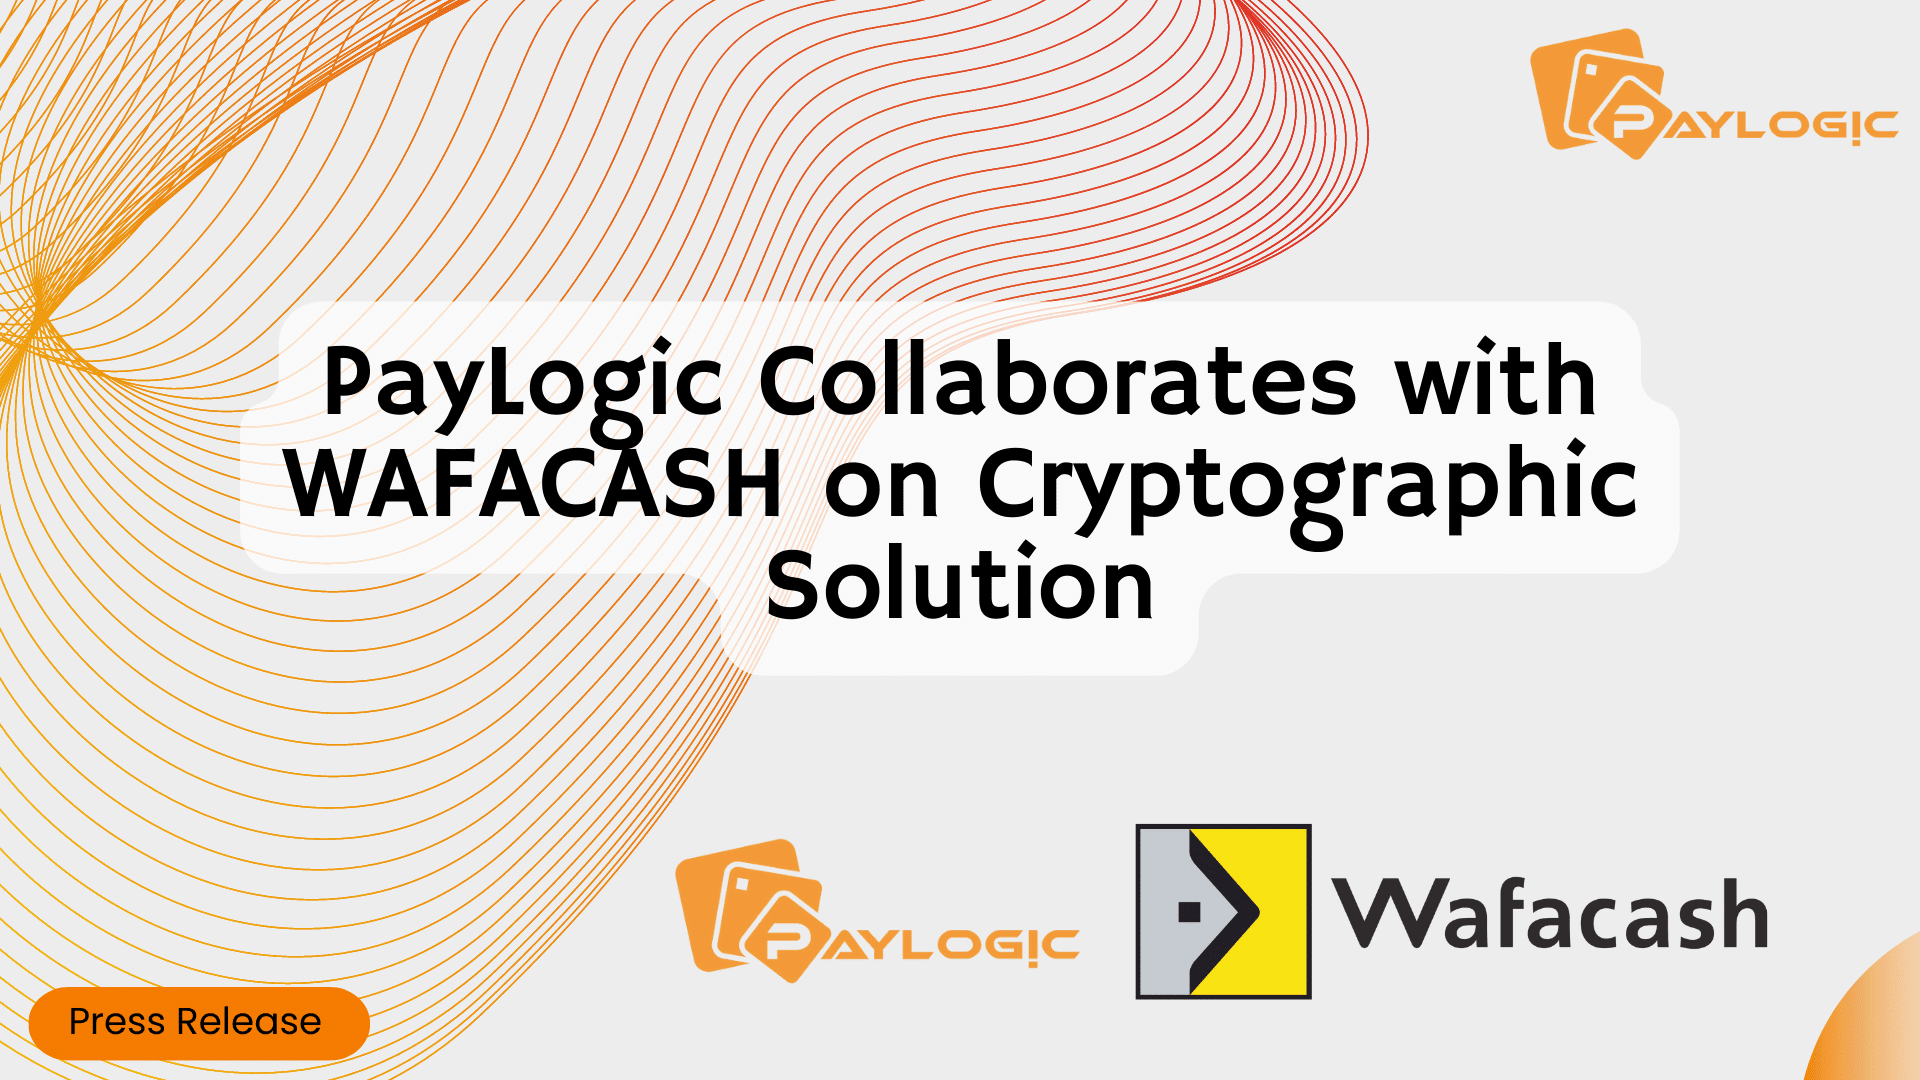 PayLogic Revolutionizes Security for WAFACASH with Cryptographic Security Platform